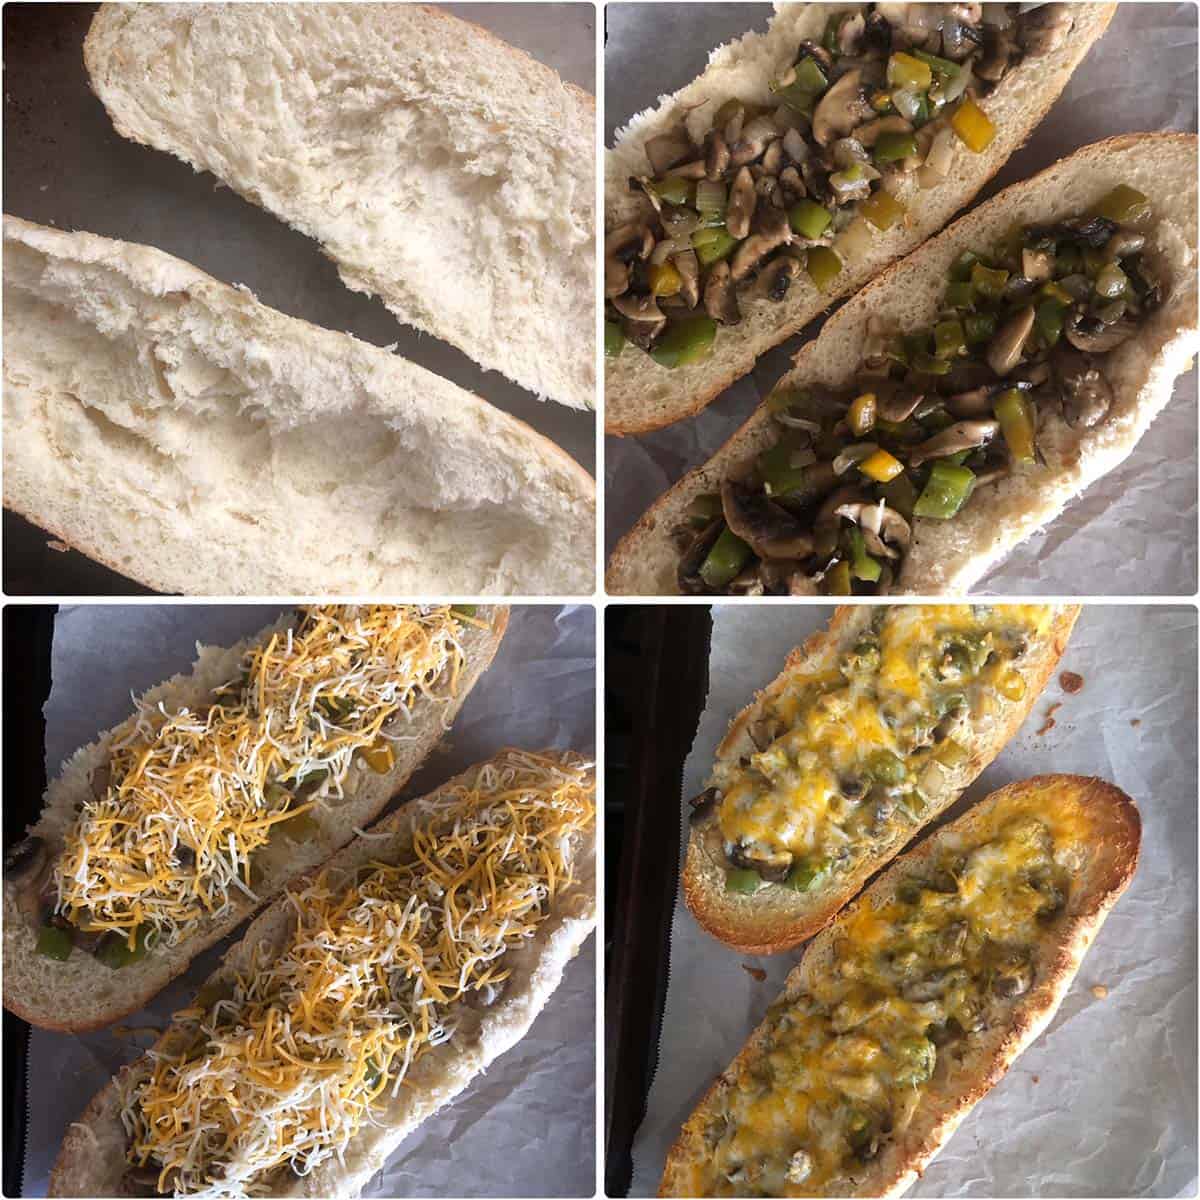 4 panel photo showing the making of baked sandwich.